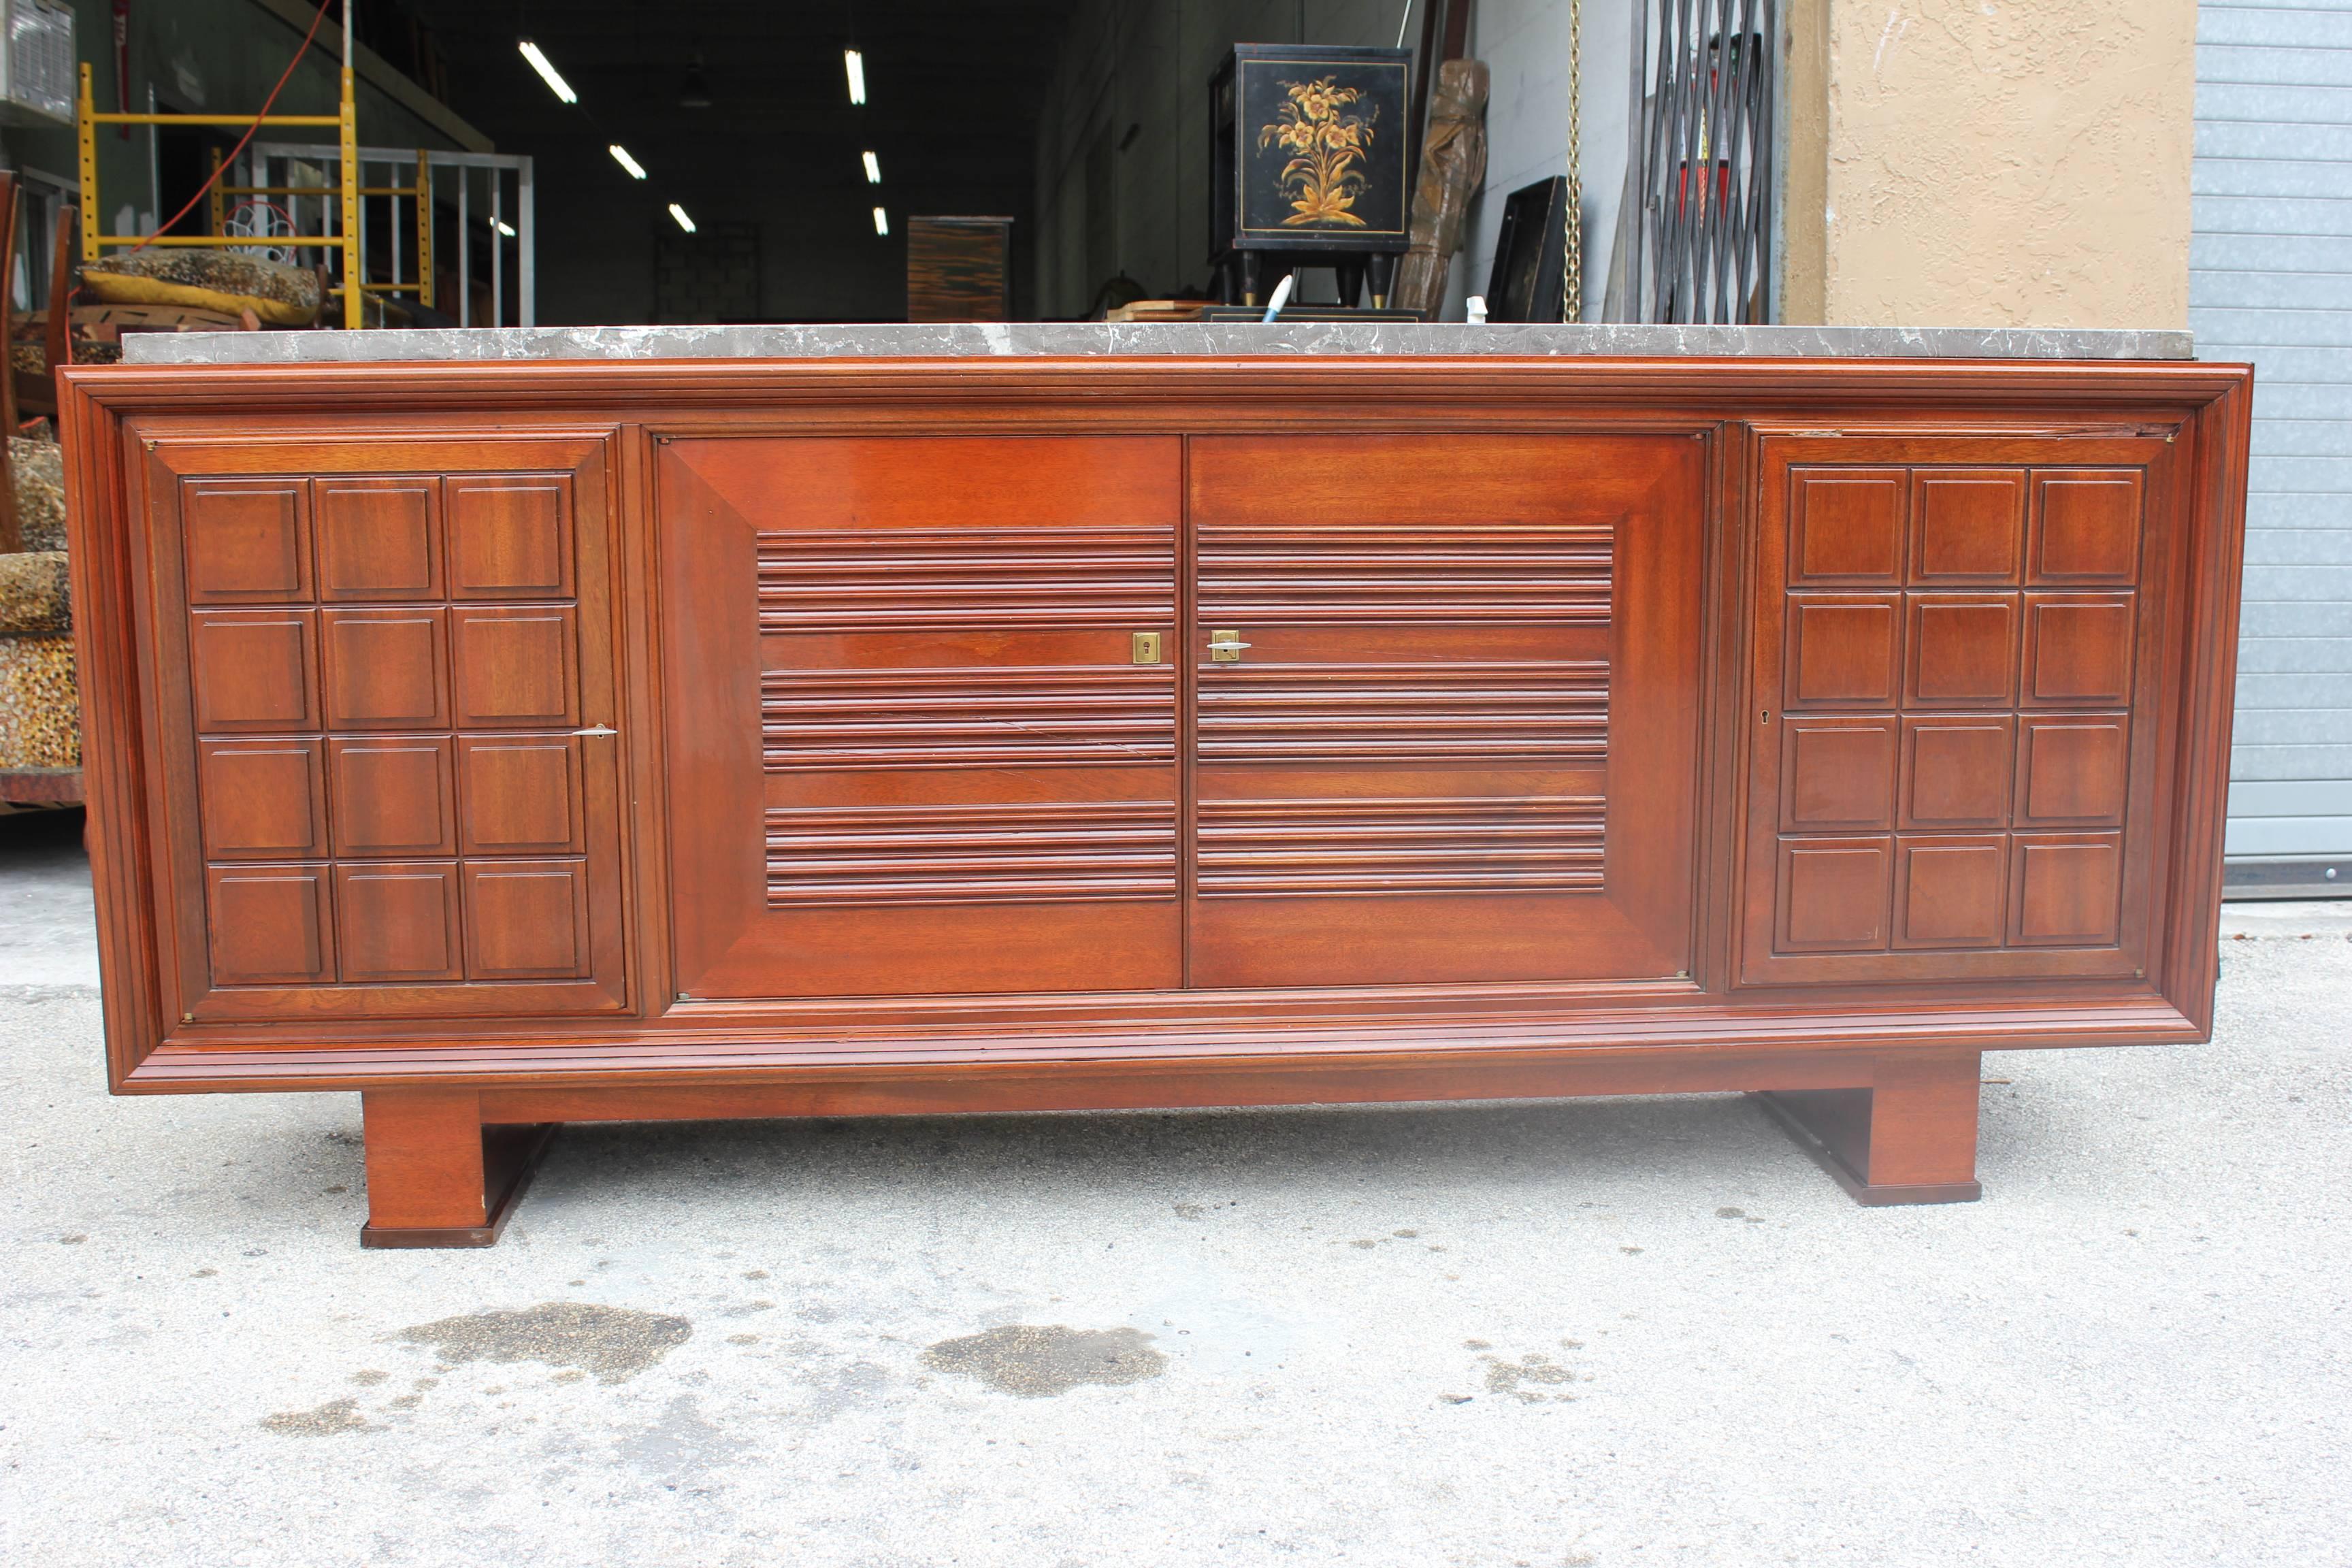 Quite the masterpiece here! A French Art Deco solid mahogany buffet by Designer Maxime Old, circa 1940s. Documented in the book 